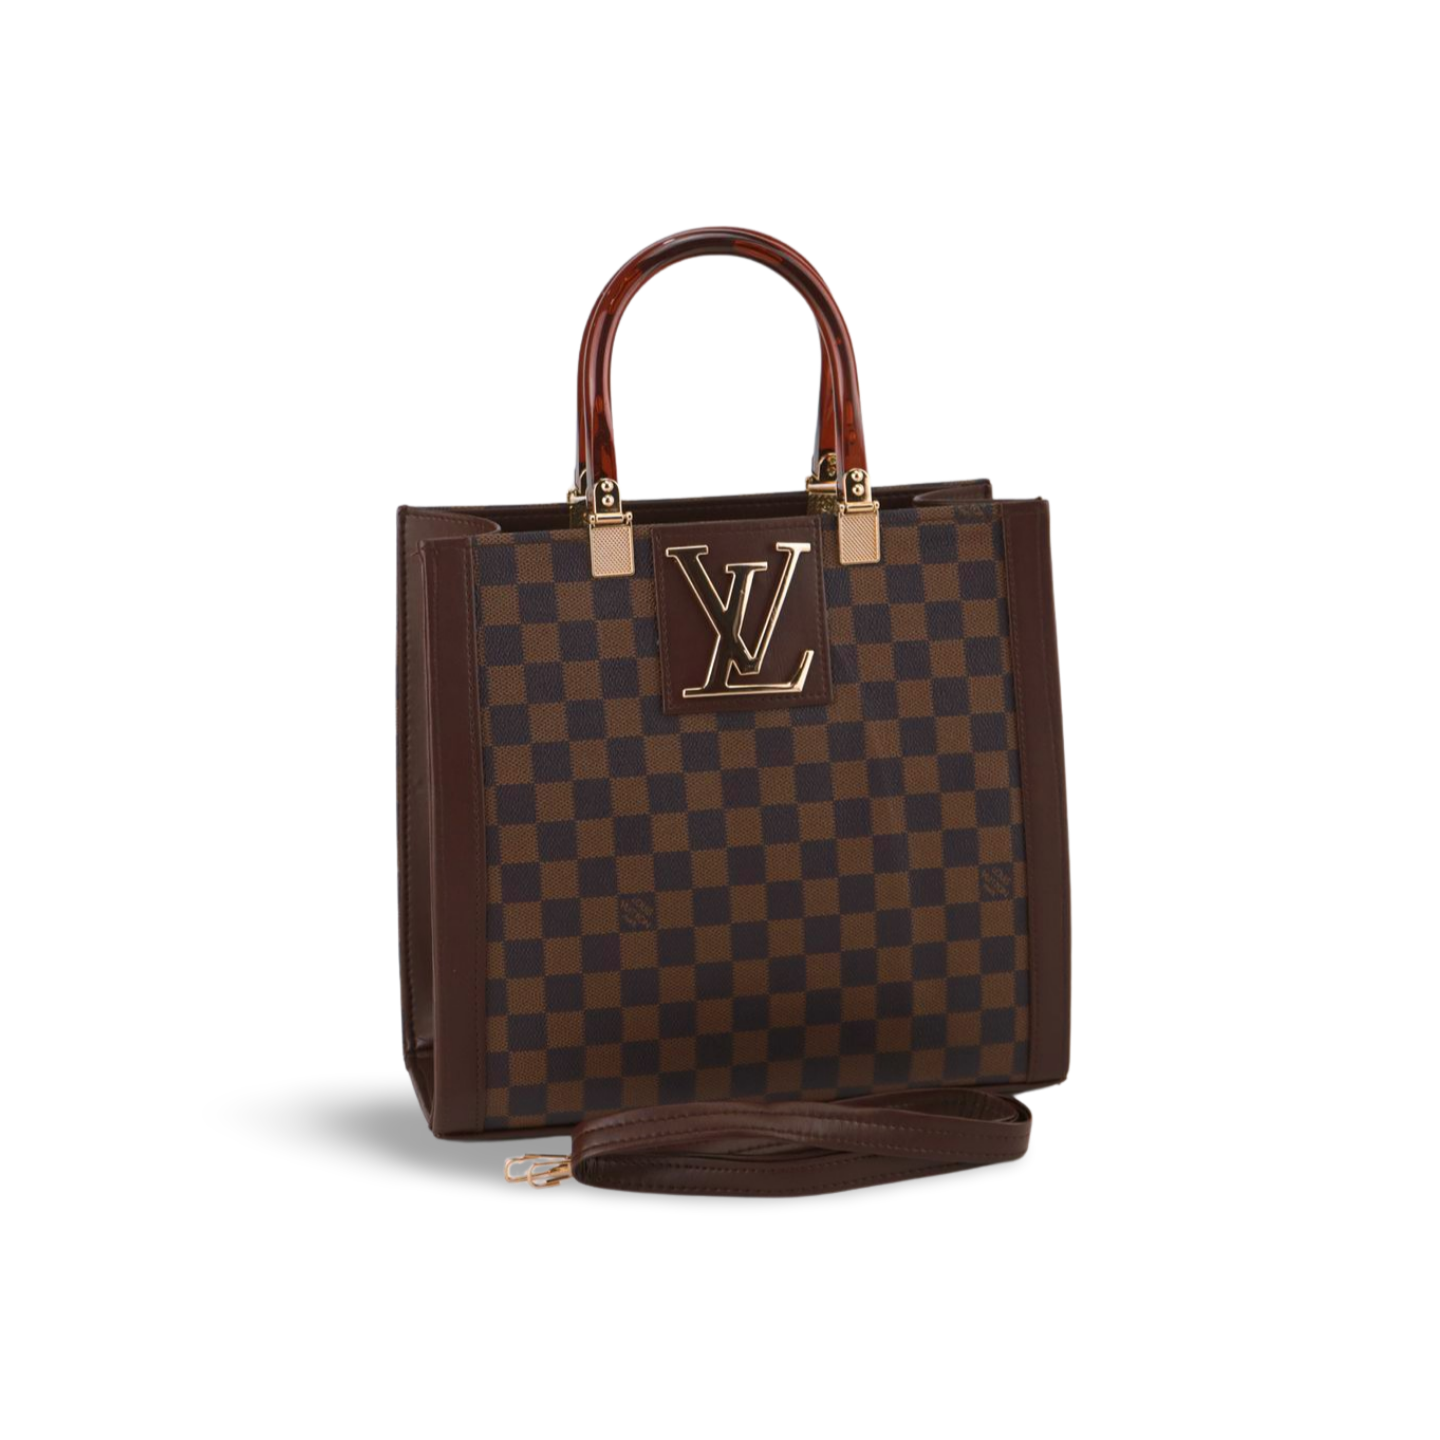 Chic Checkered Tote Bag with Plastic Handles and Strap